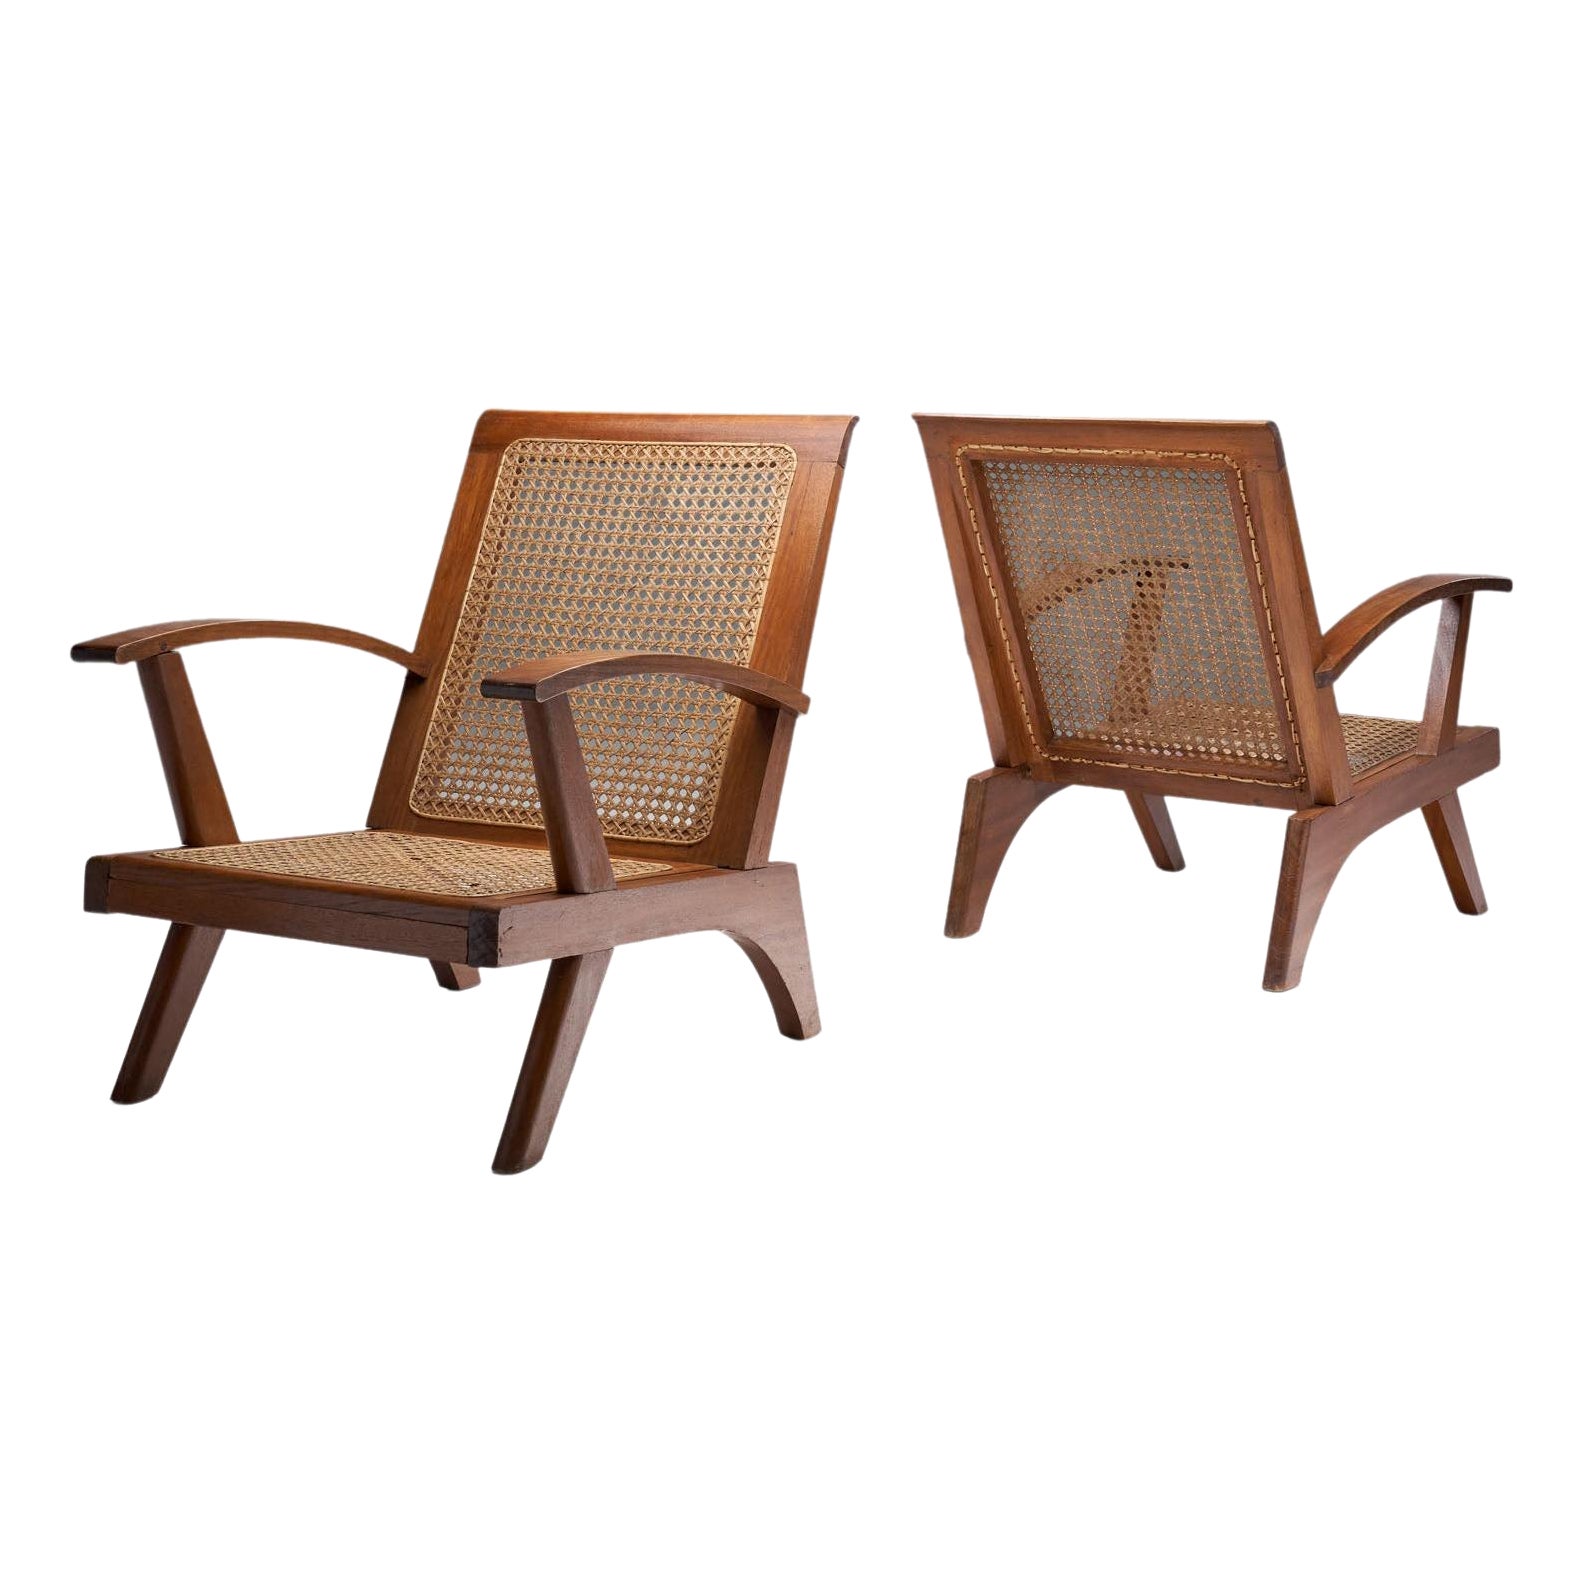 Pair of French Teak Armchairs, France, 1950s For Sale